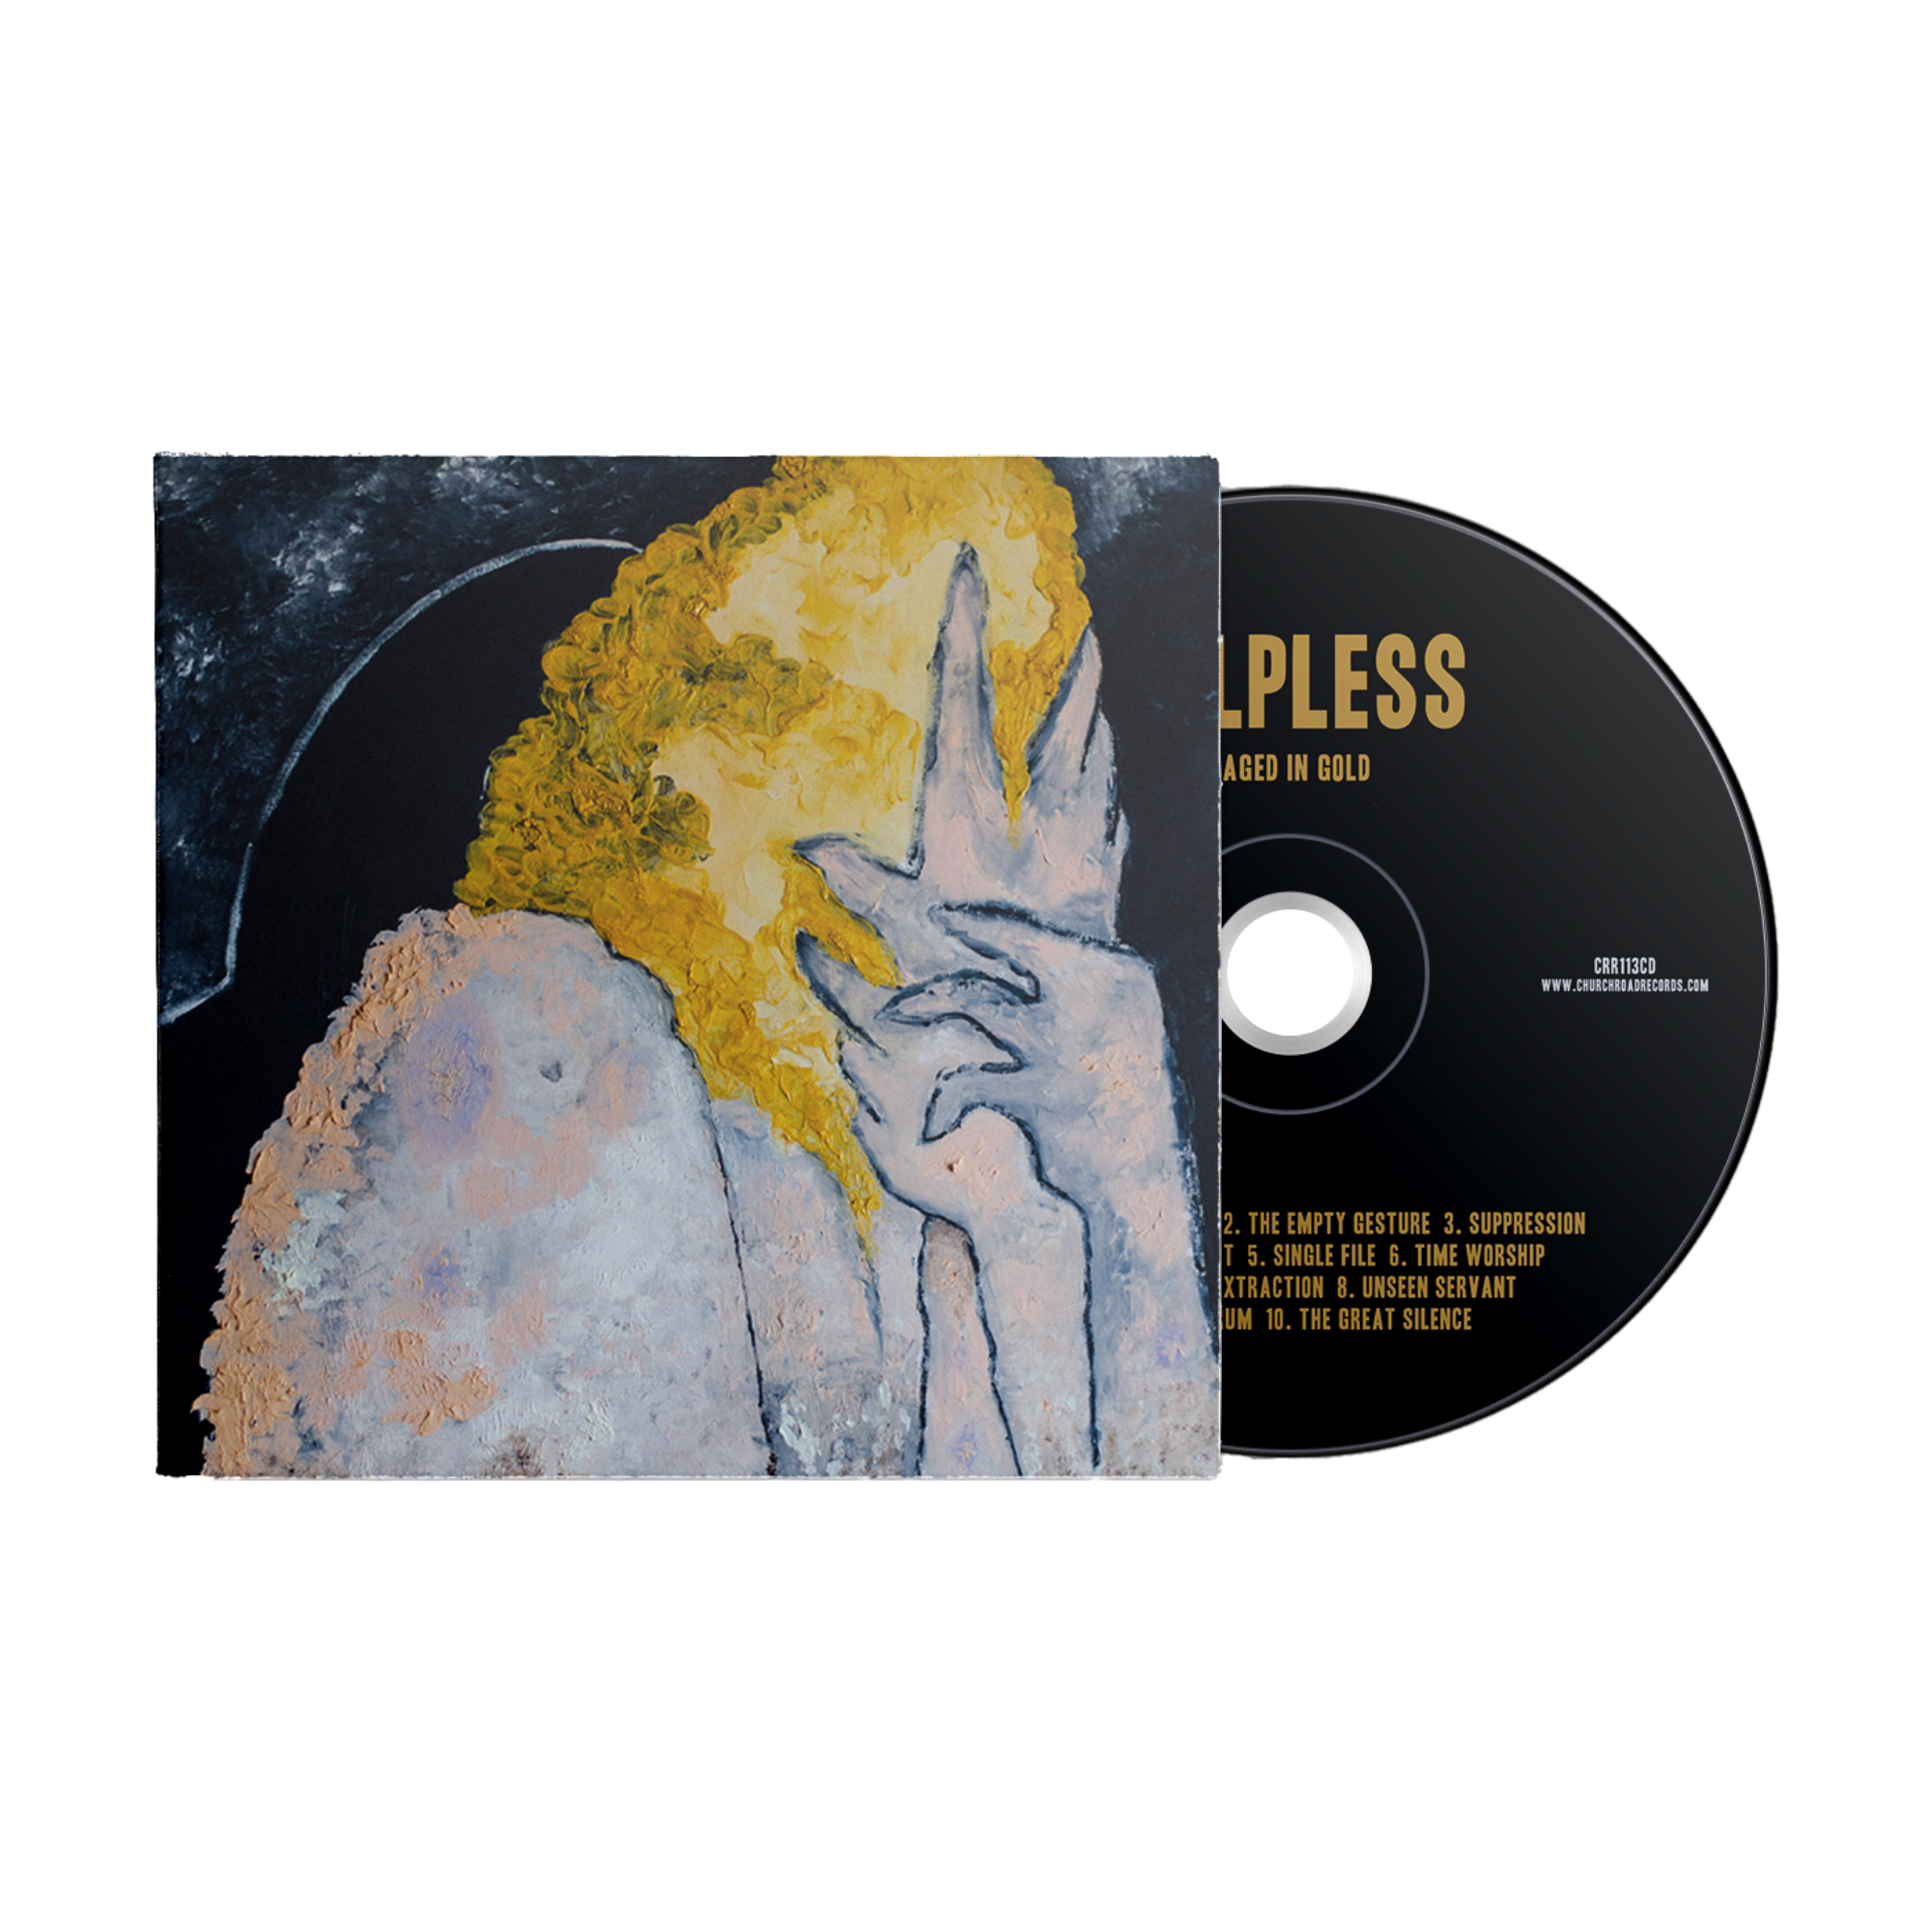 Helpless - Caged In Gold - cd.png